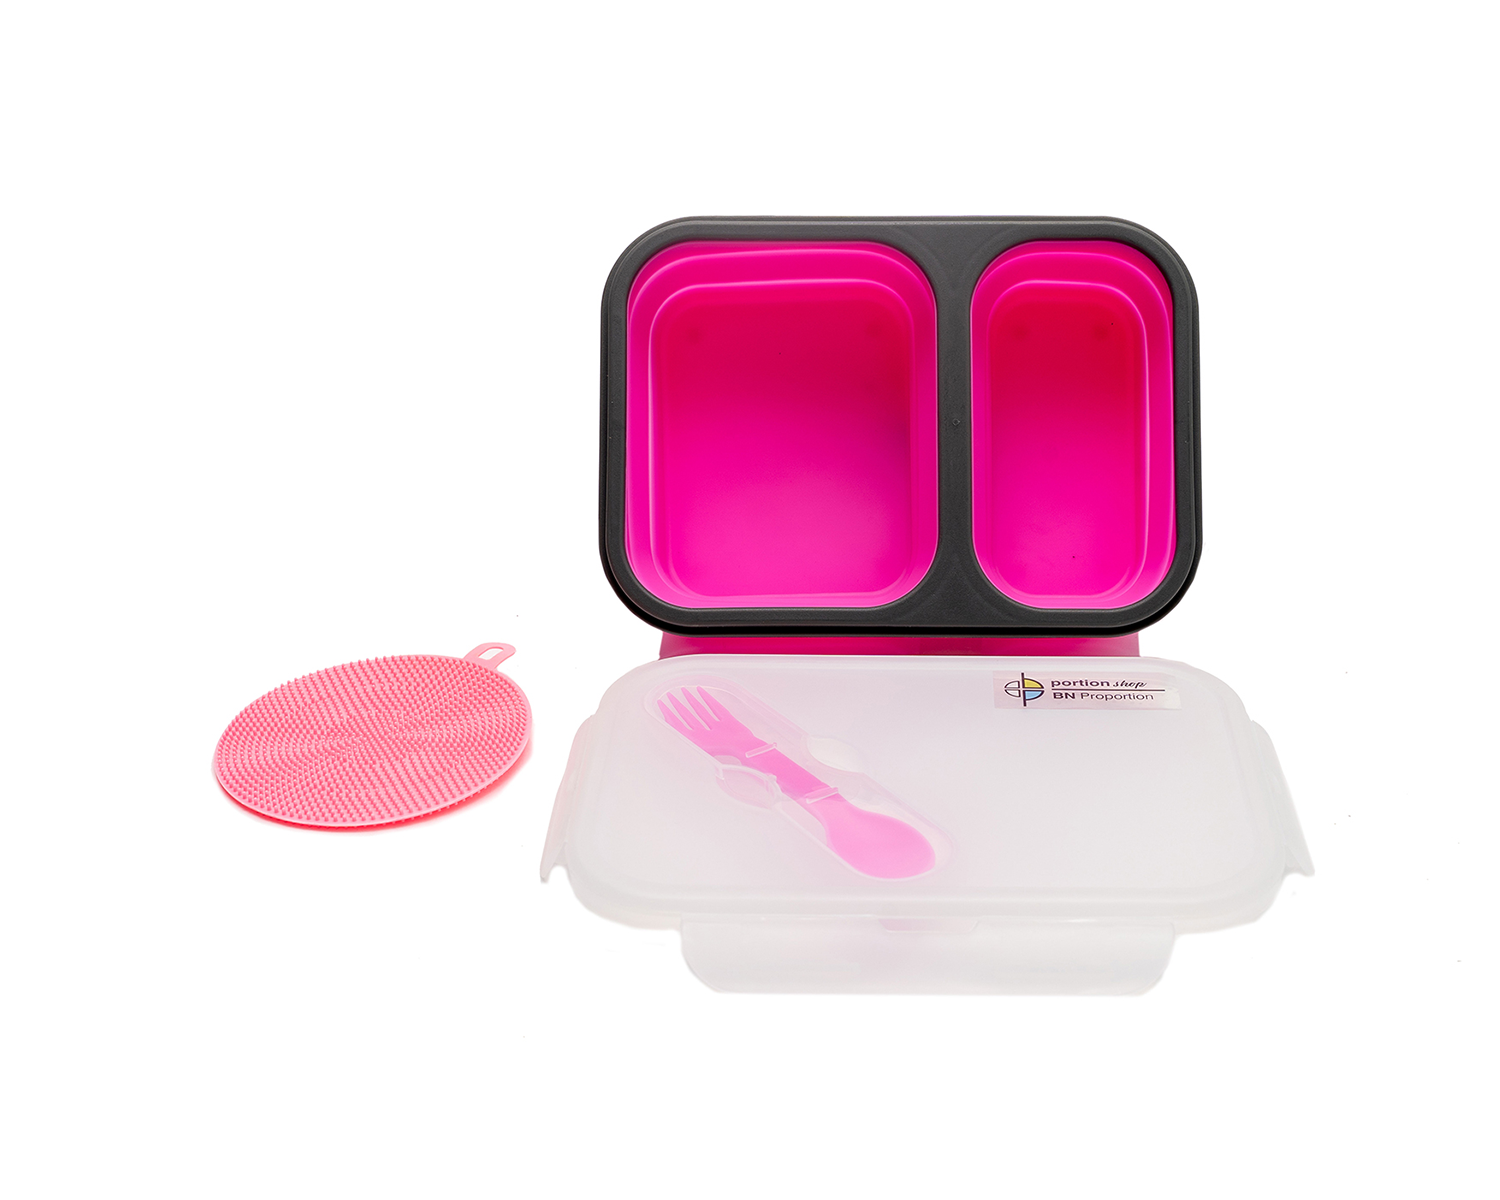 Your Zone BTS Plastic Bento Box with 4 Compartments, 1 Fork, 1 Spoon, 1  Dressing Container, Pink